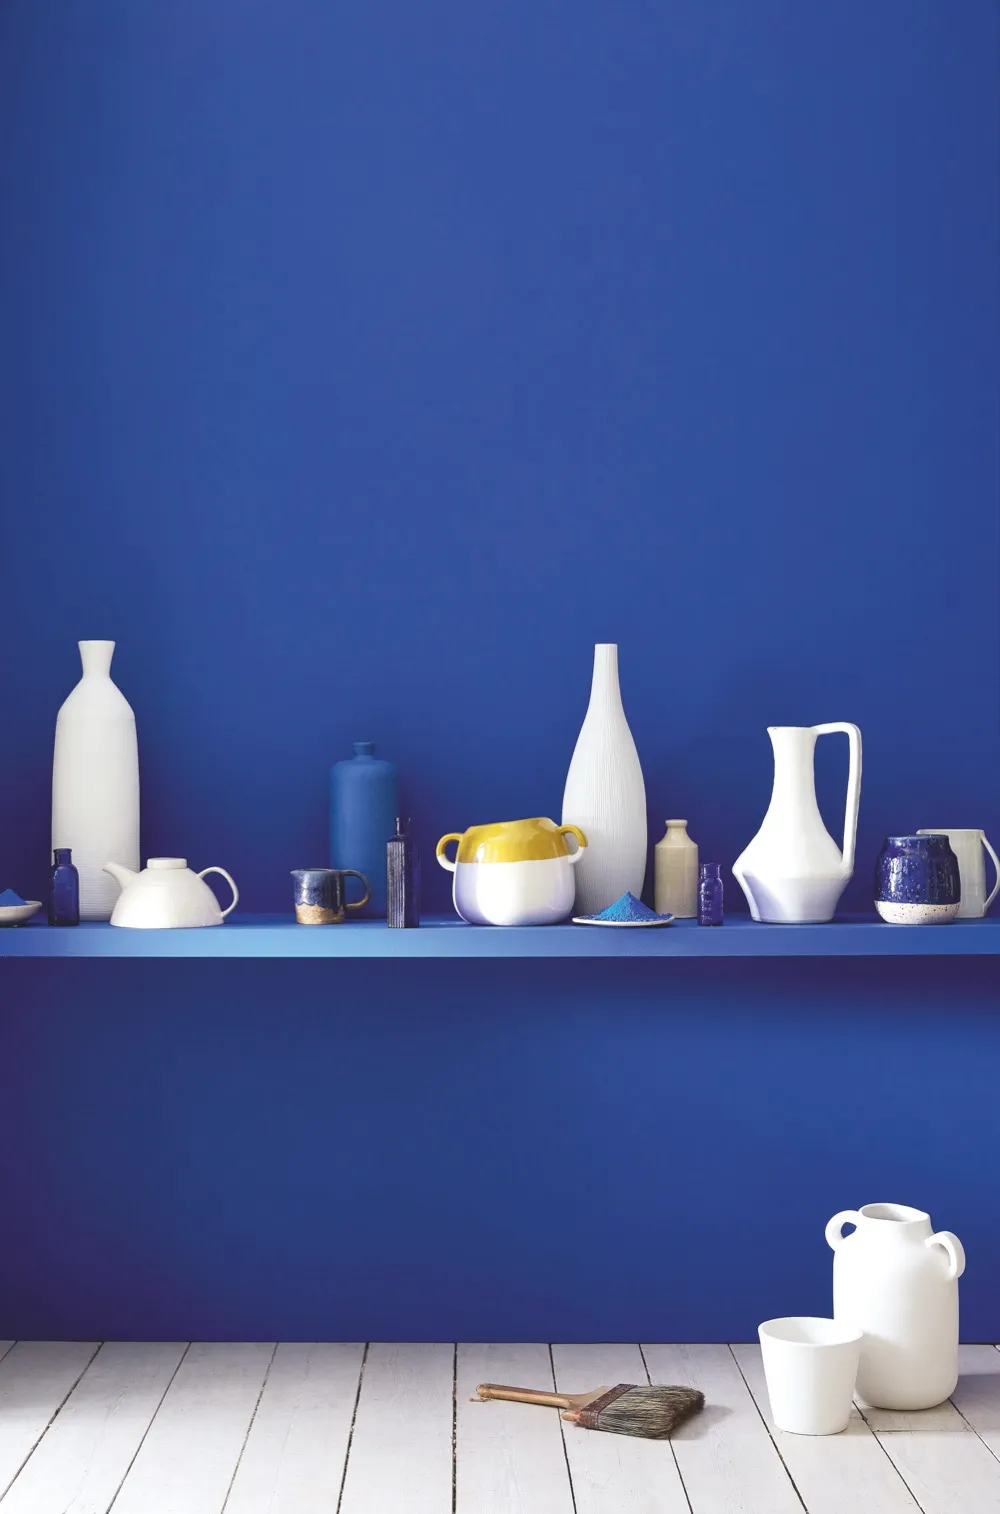 A wall painted in bright blue paint with a matching shelf. In the shelf is an array of contemporary blue, white and yellow ceramics